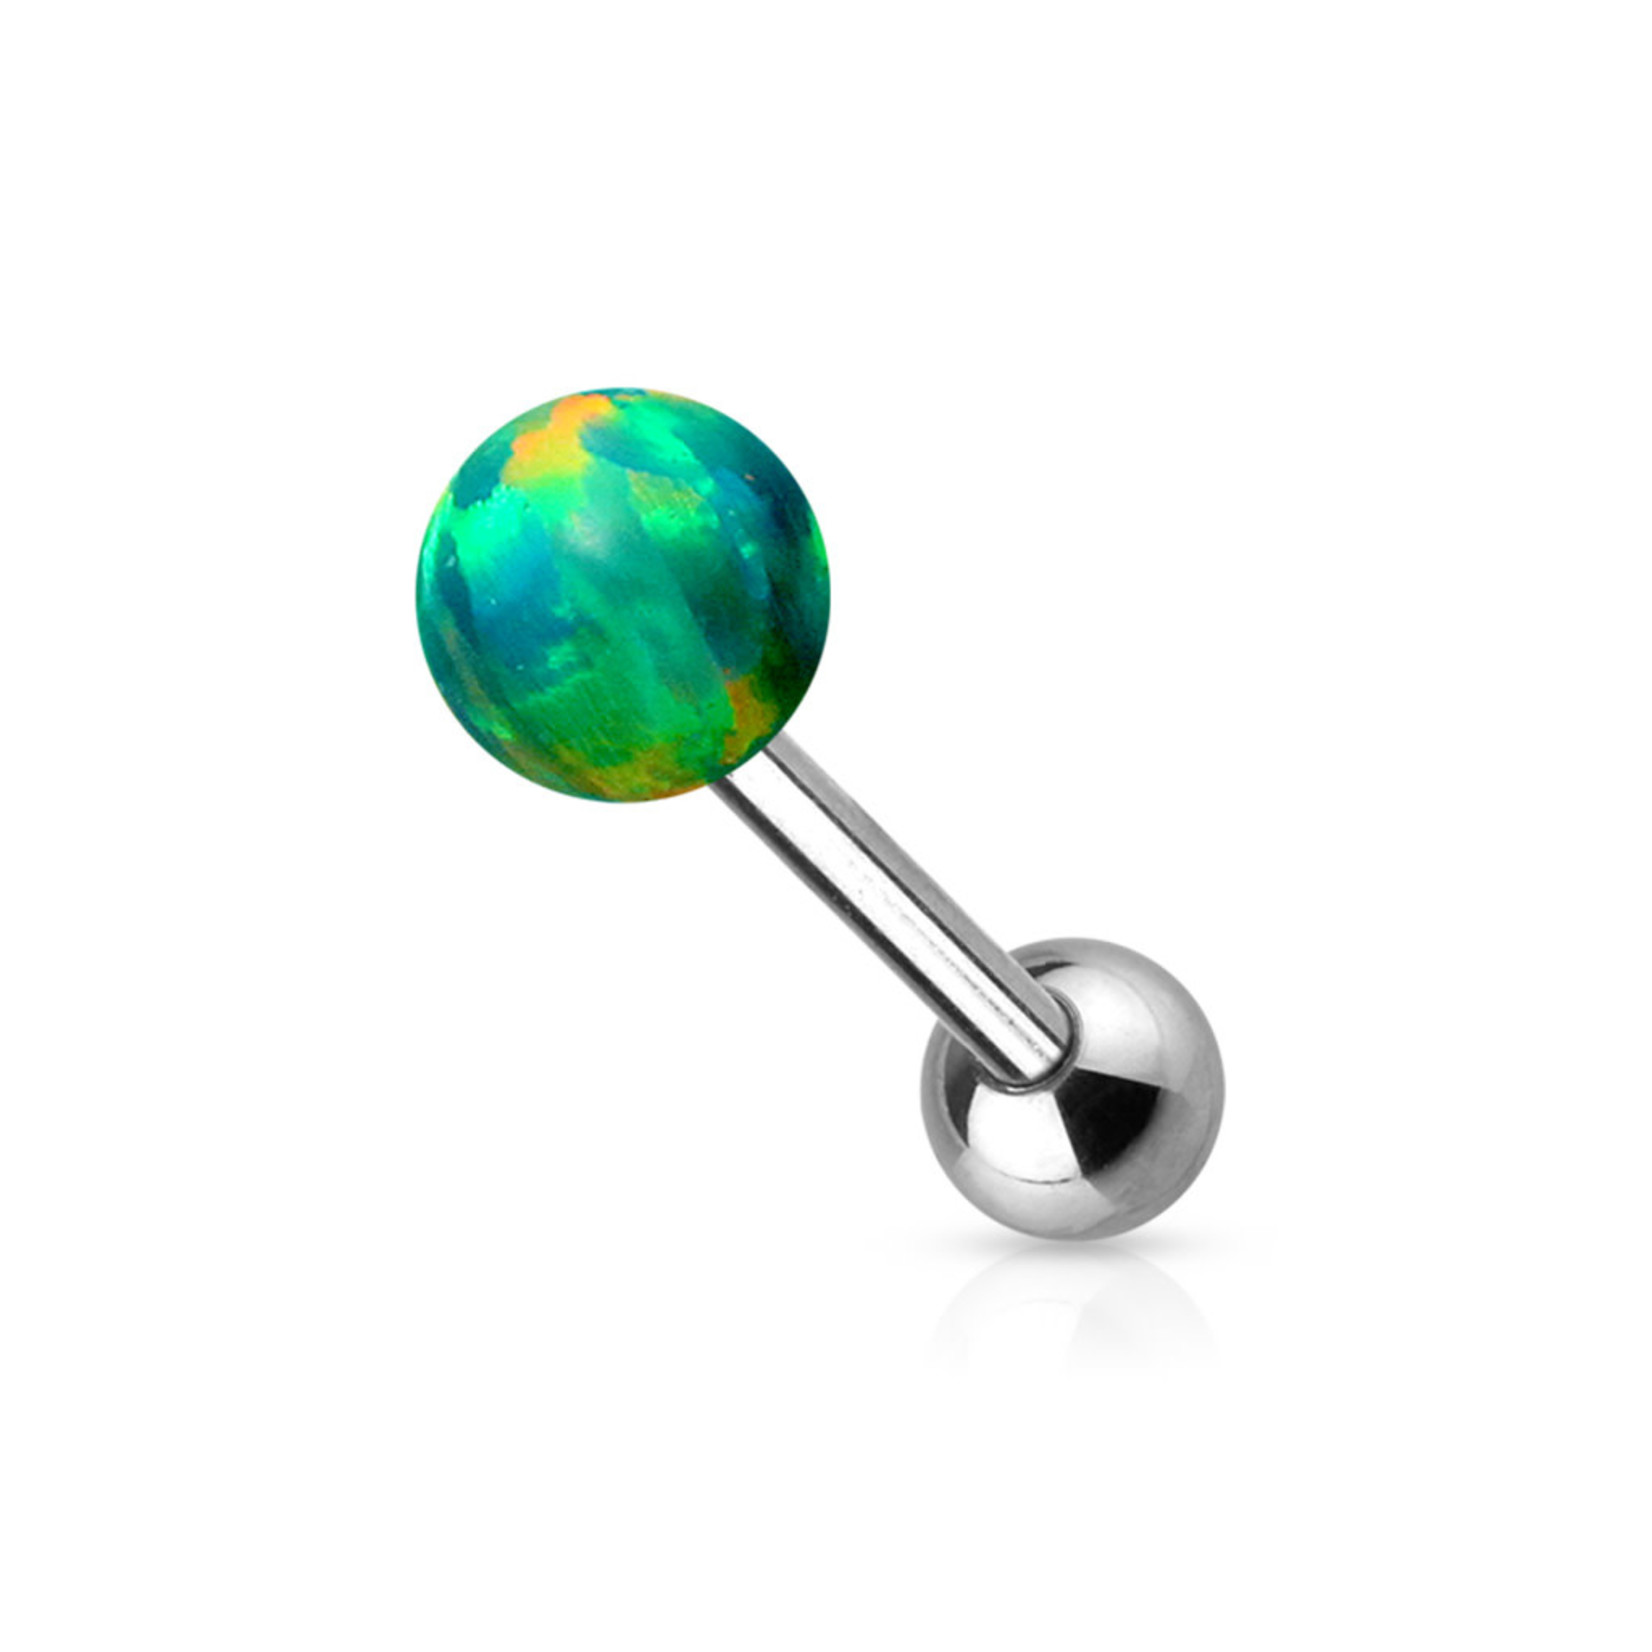 Hollywood Body Jewelry Opal Ball Tongue Barbell